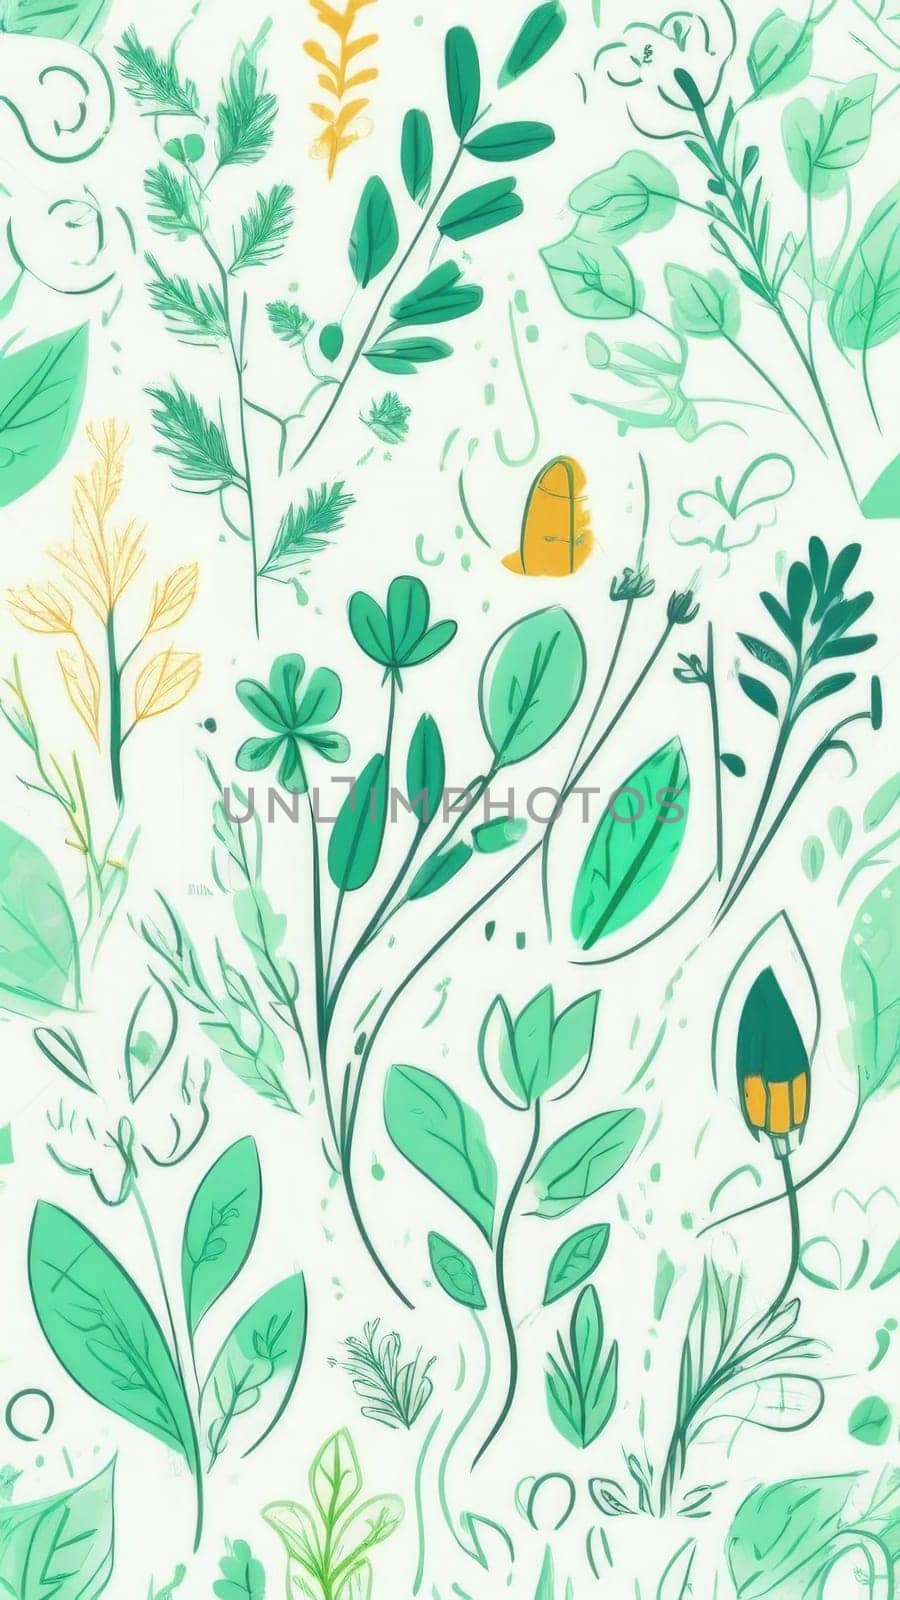 Green background with drawing of leaves and flowers. Drawing is of various types of leaves and flowers, with some of them being large and small. Concept of growth and vitality background. Copy space